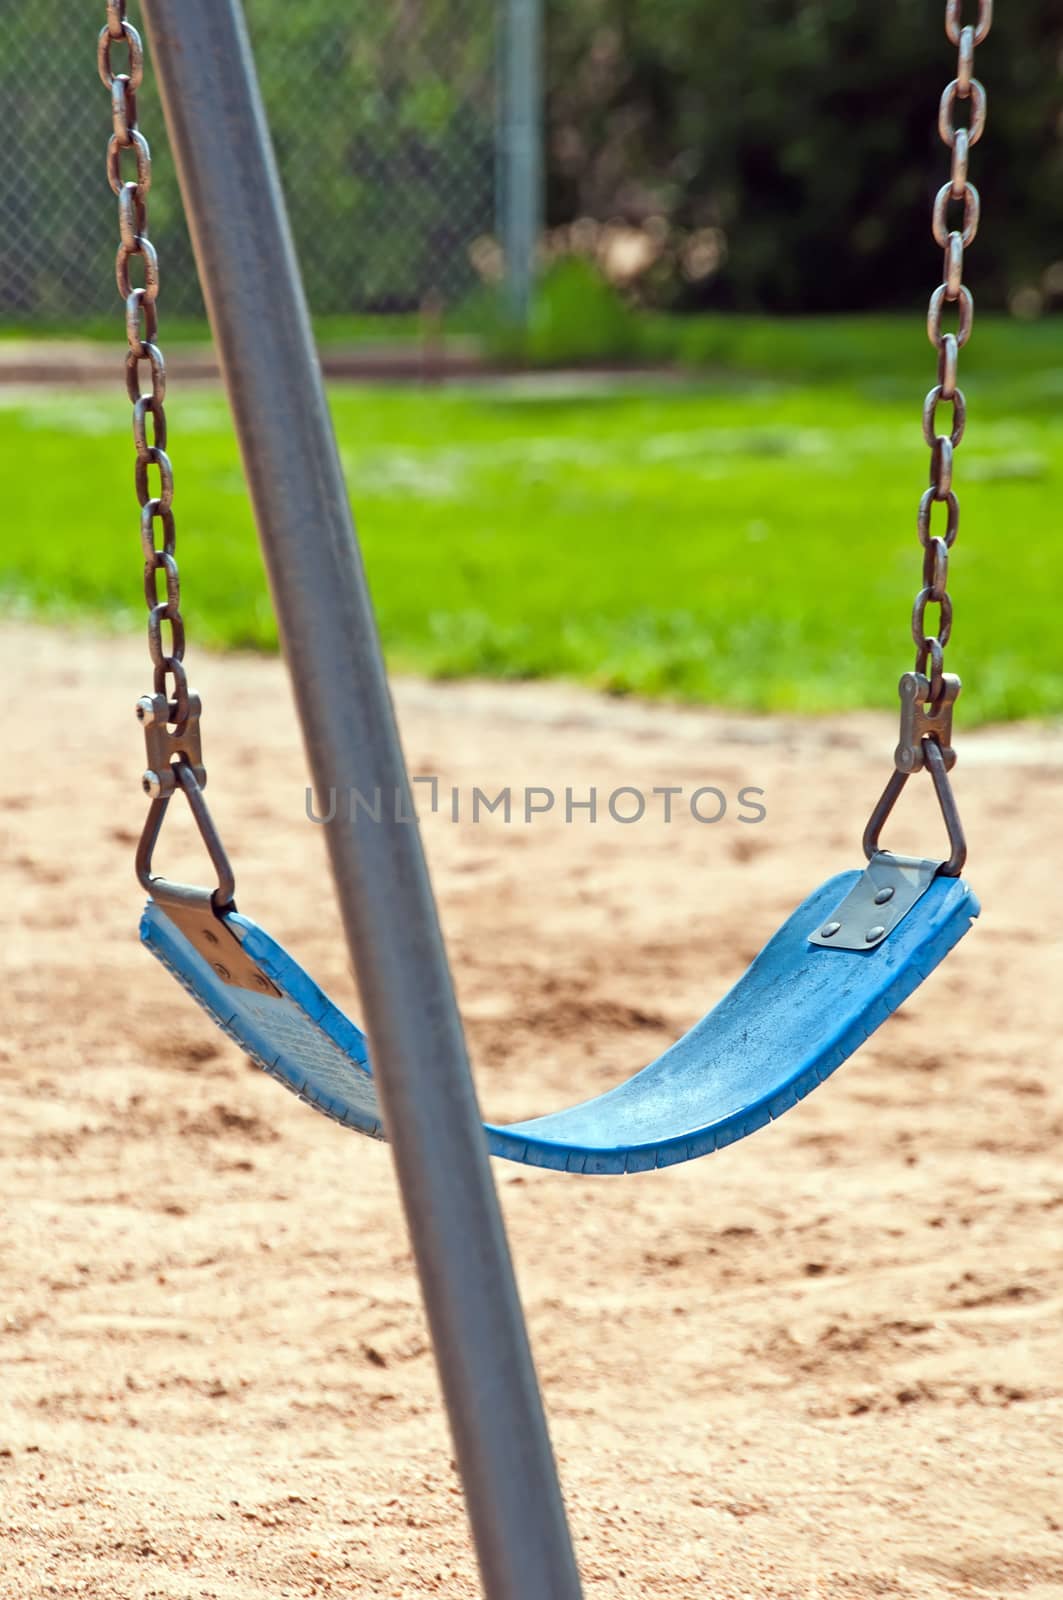 A single park swing sitting idle waiting for joyful children to play on it.